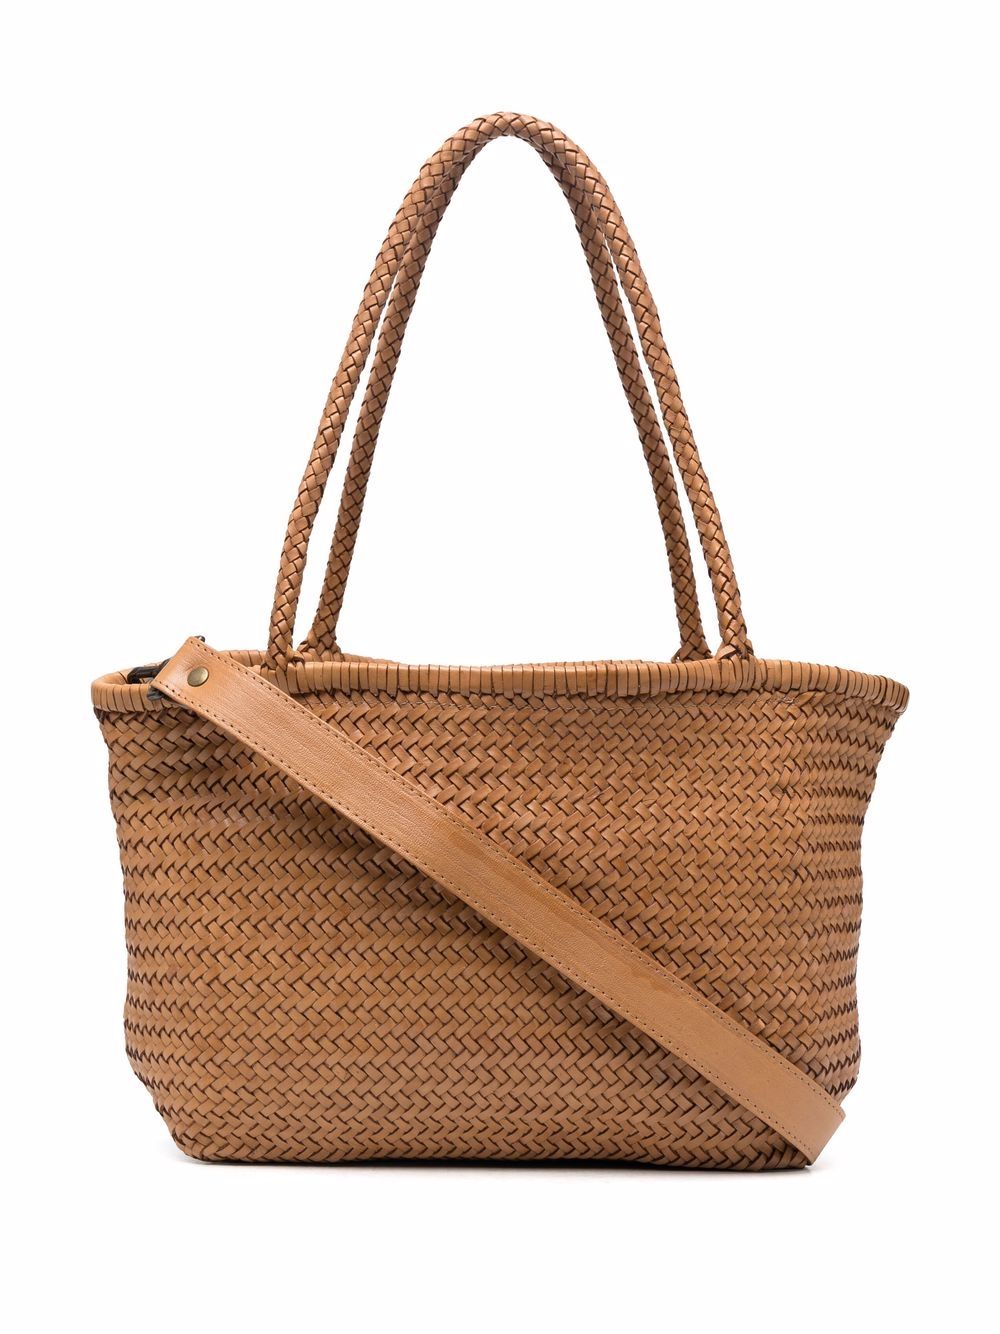 Susan woven tote